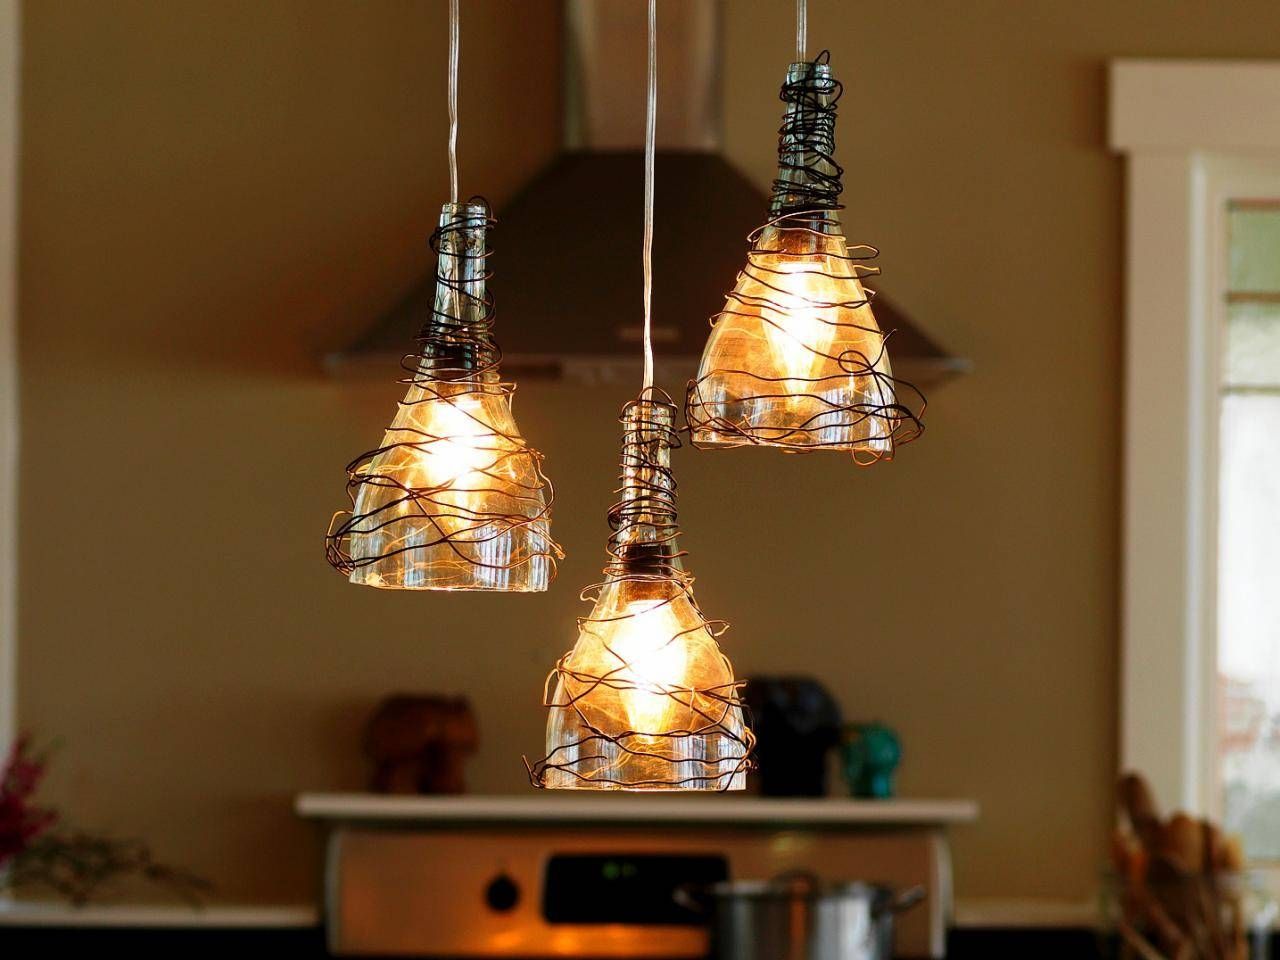 The Best Collection Of Wine Bottle Pendant Light Kits